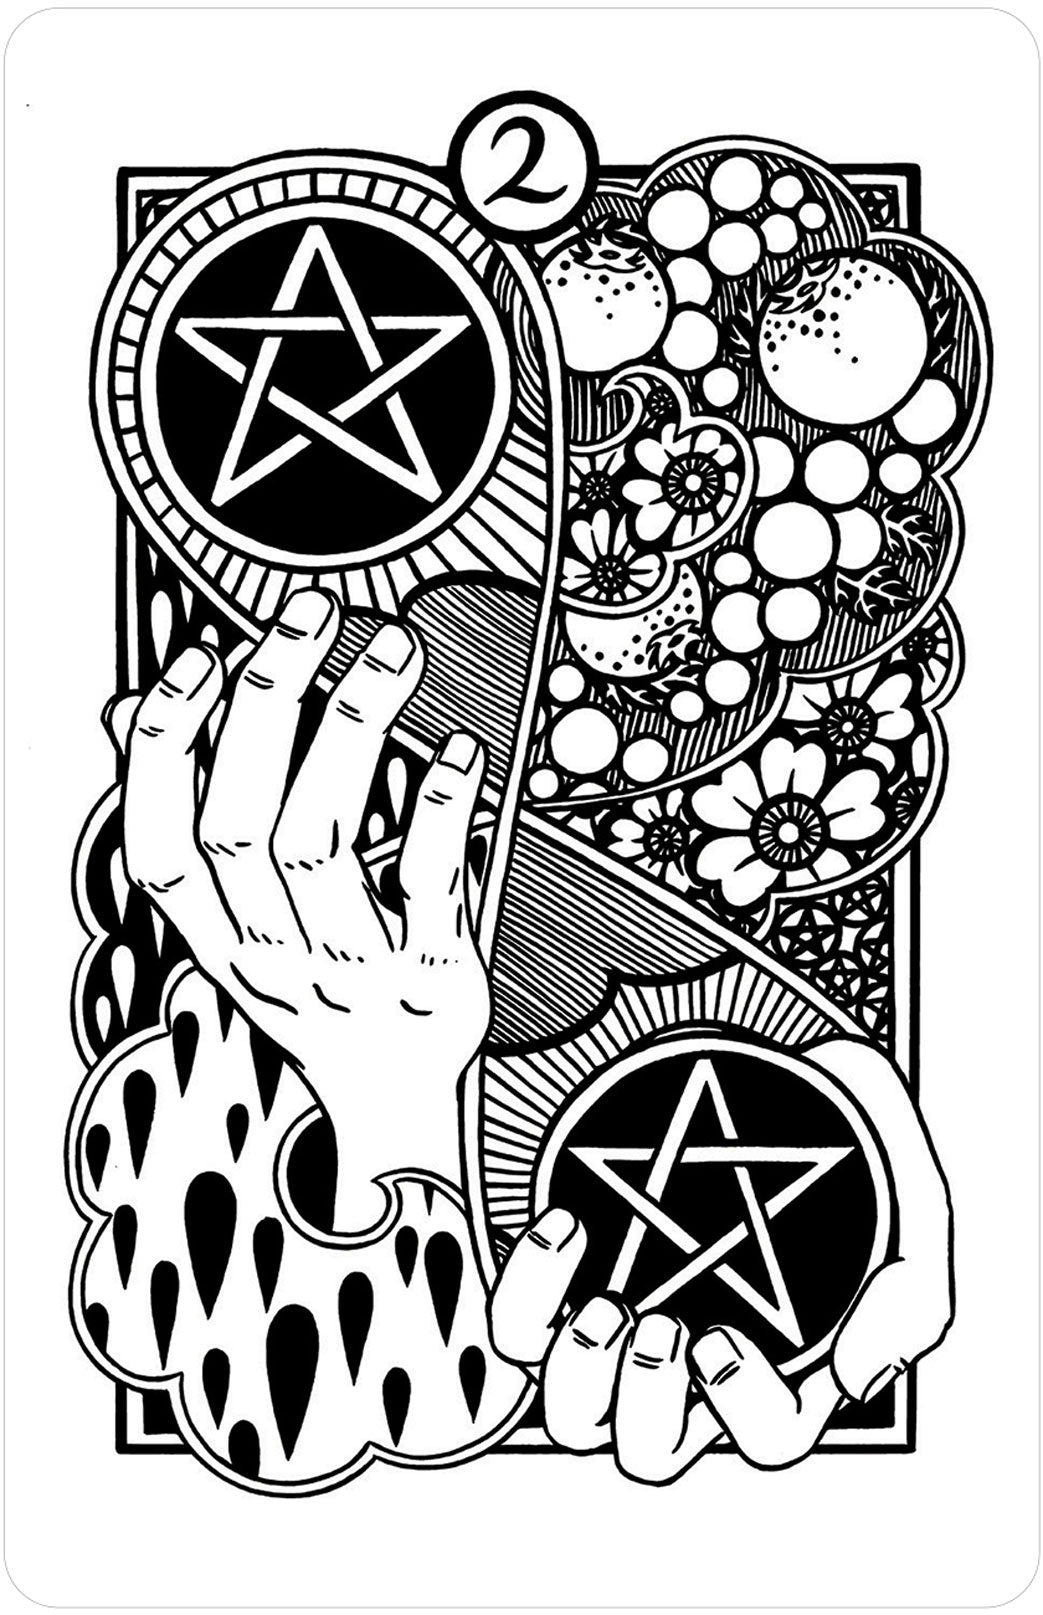 2 of pentacles card